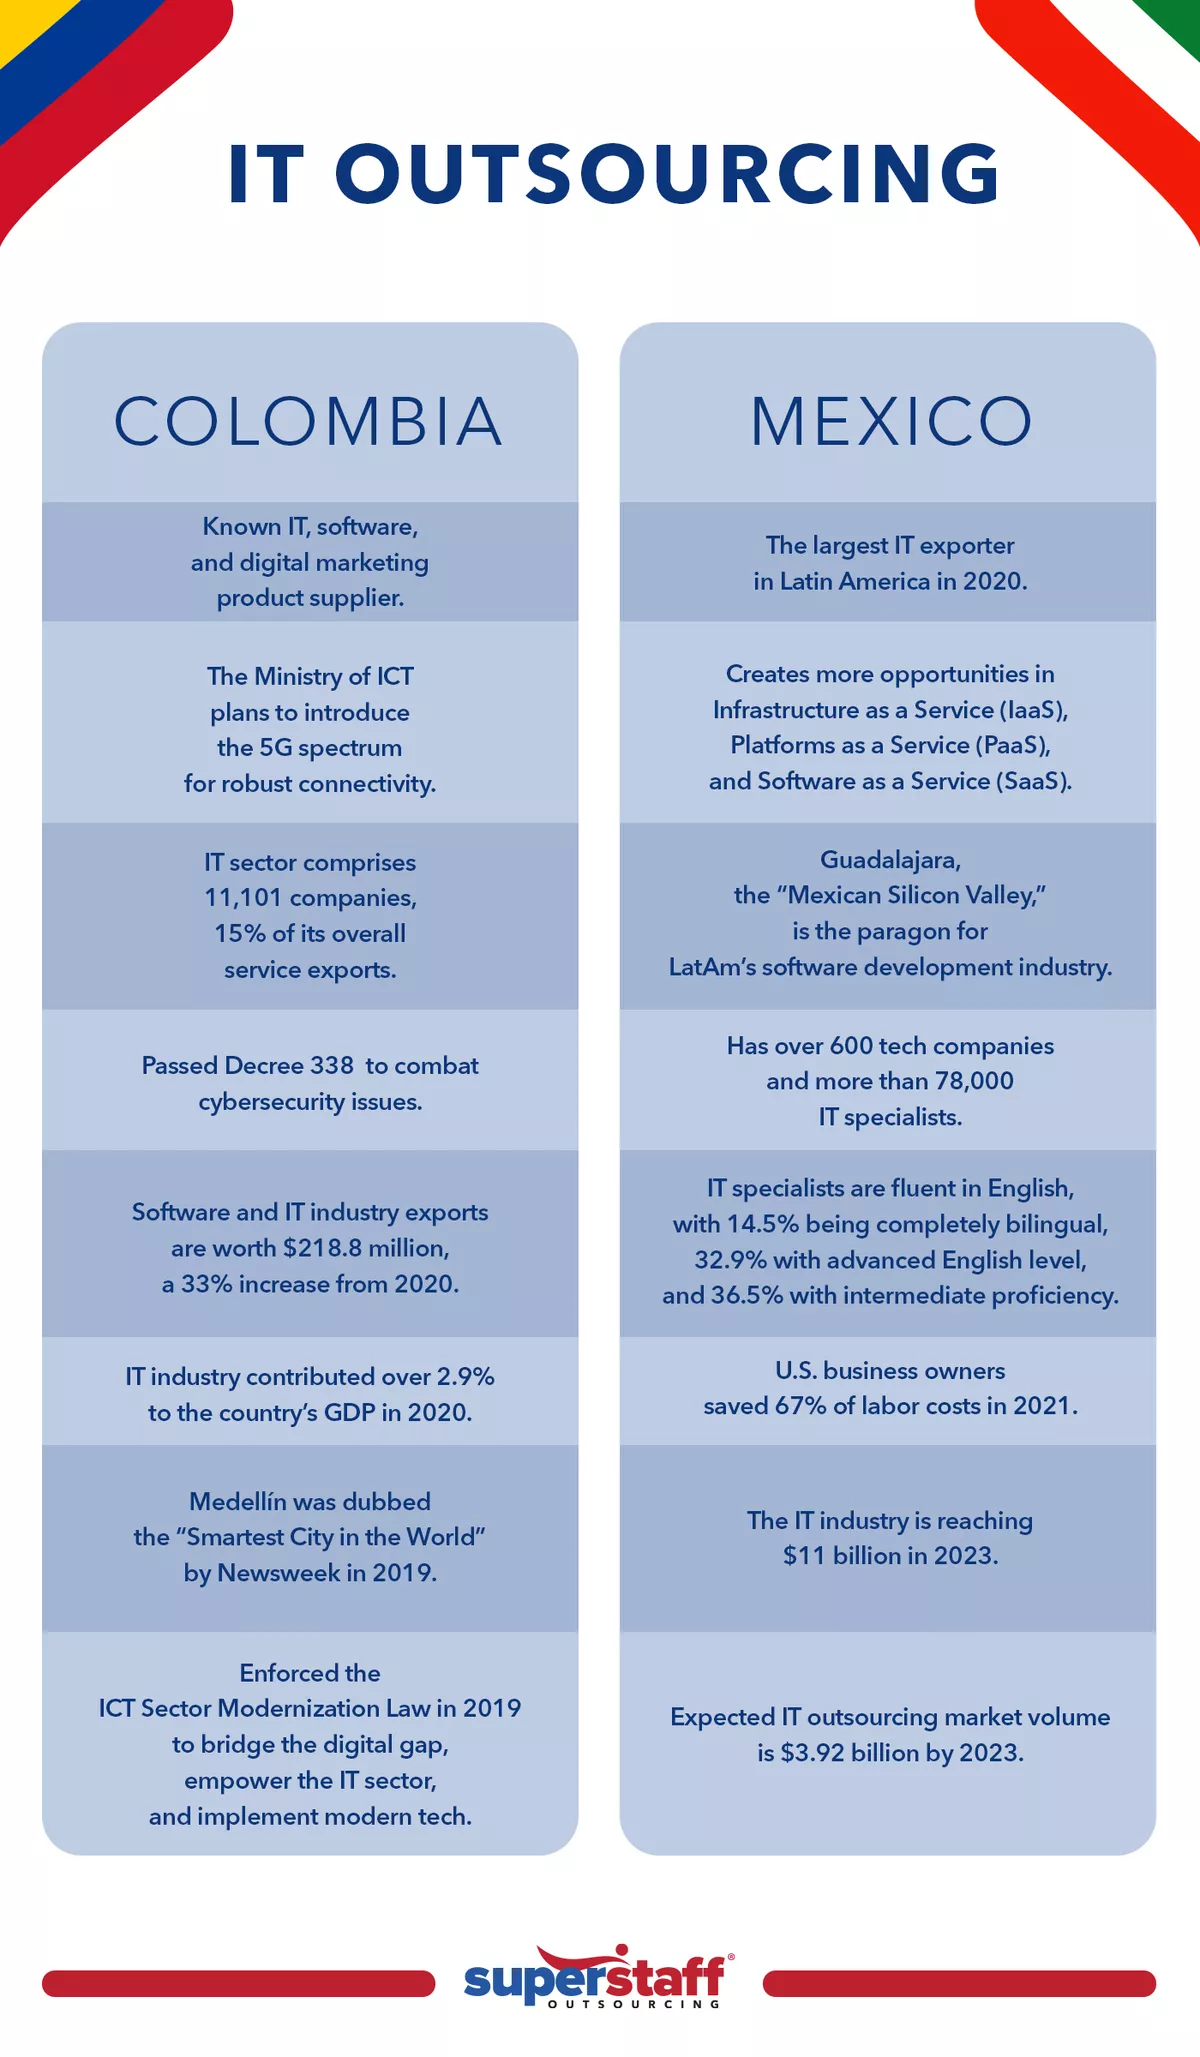 An infographic compares IT services for nearshore technology outsourcing in Colombia and Mexico.